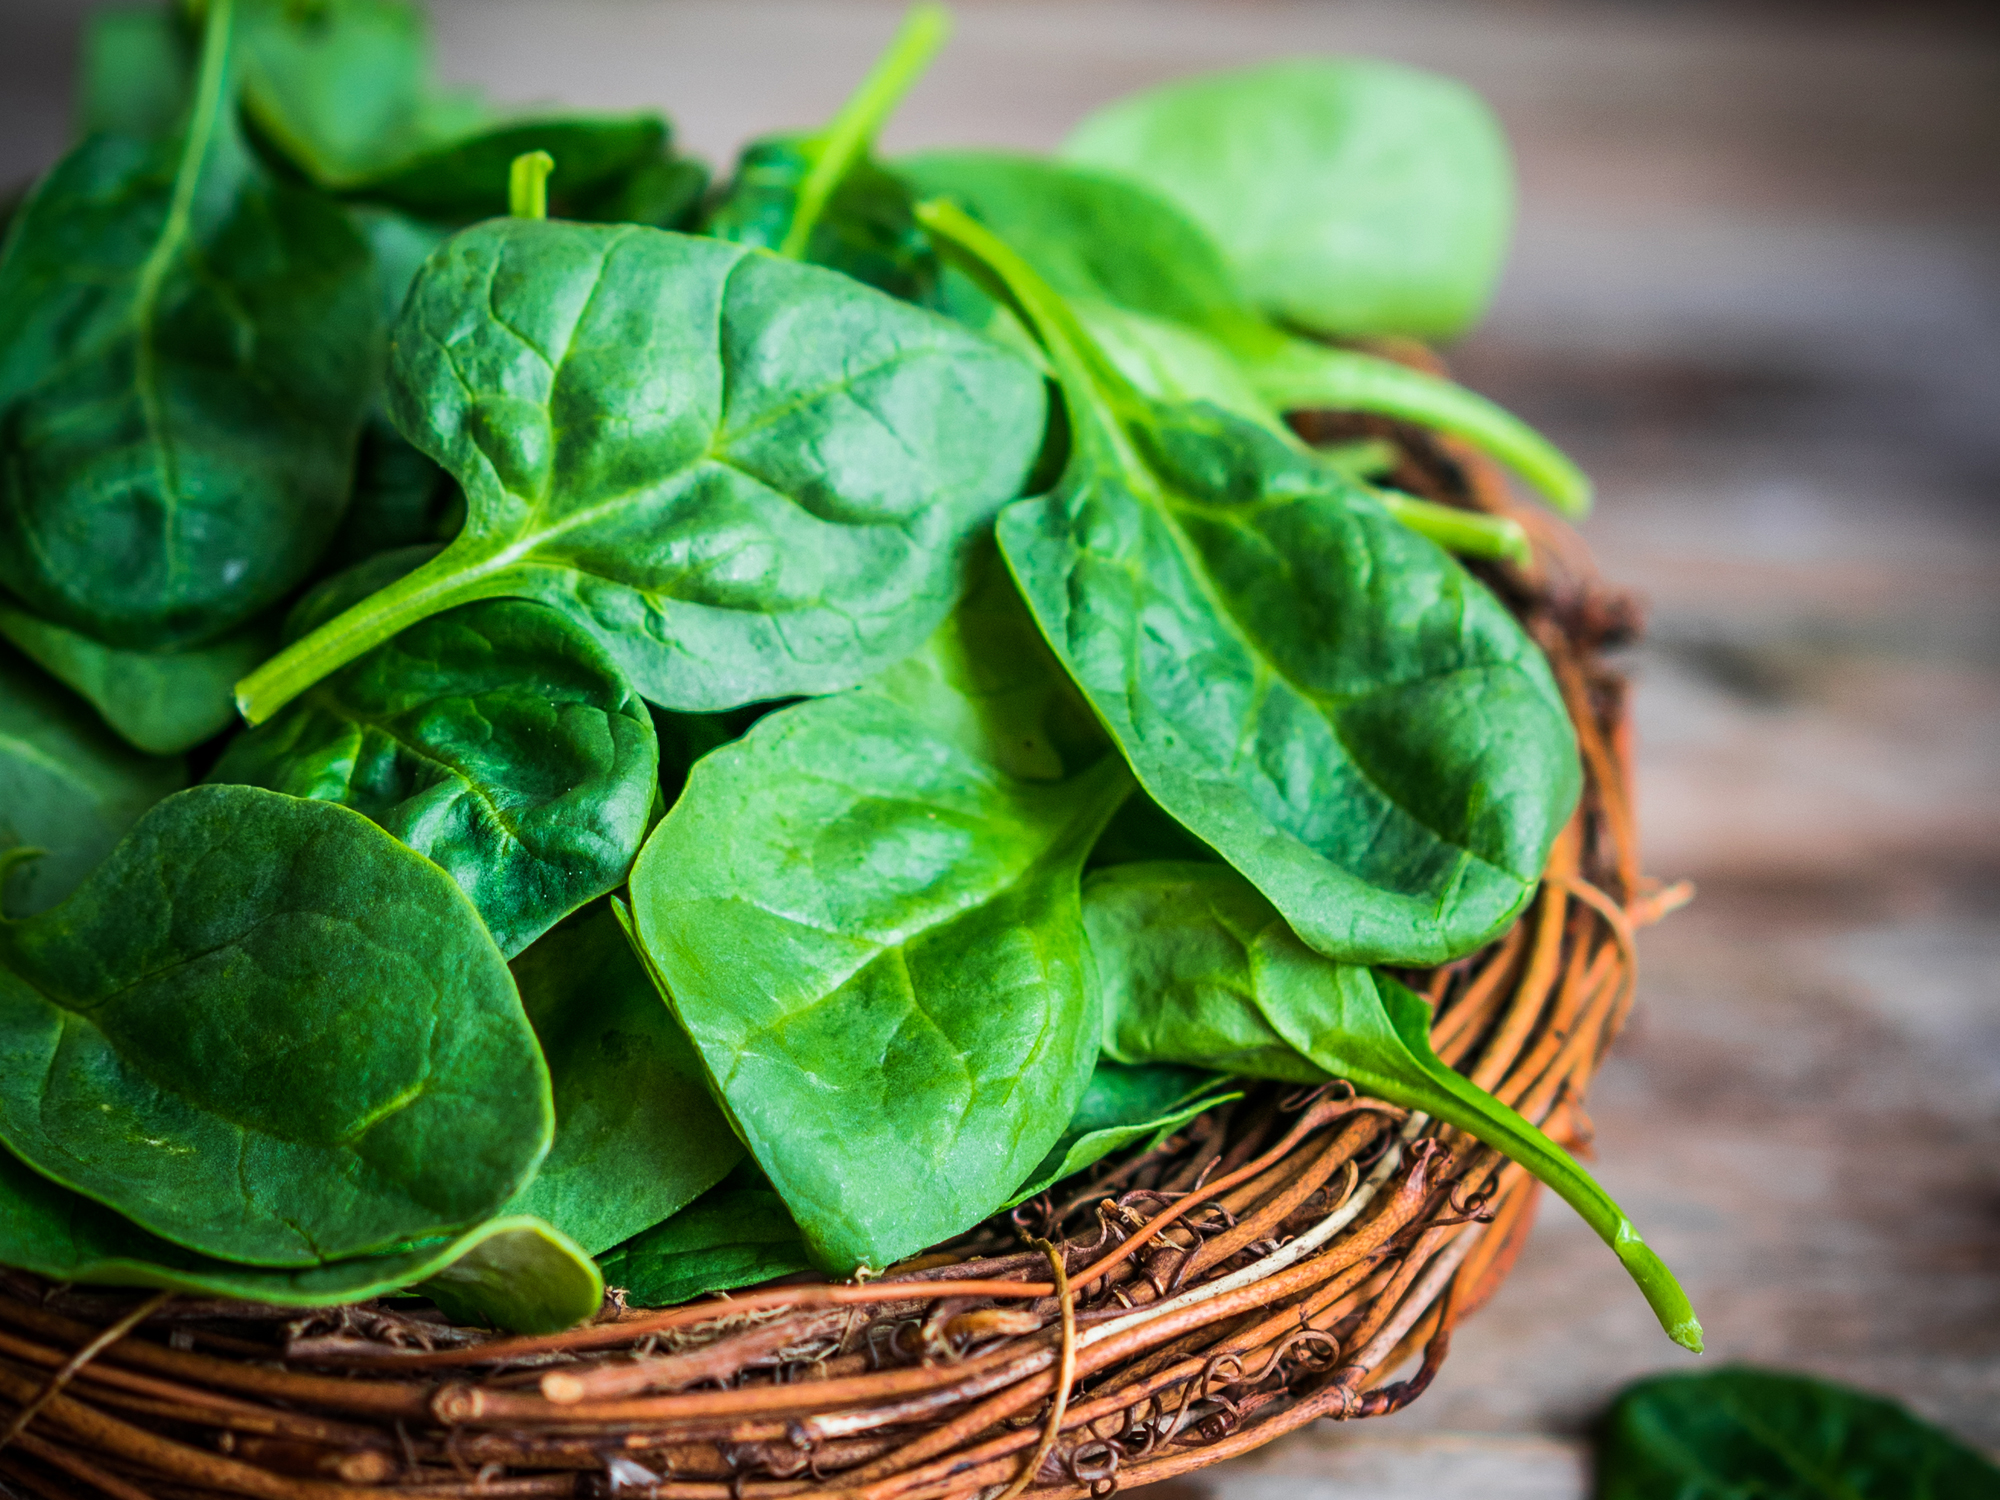 How to squeeze the most cataract-fighting lutein from spinach